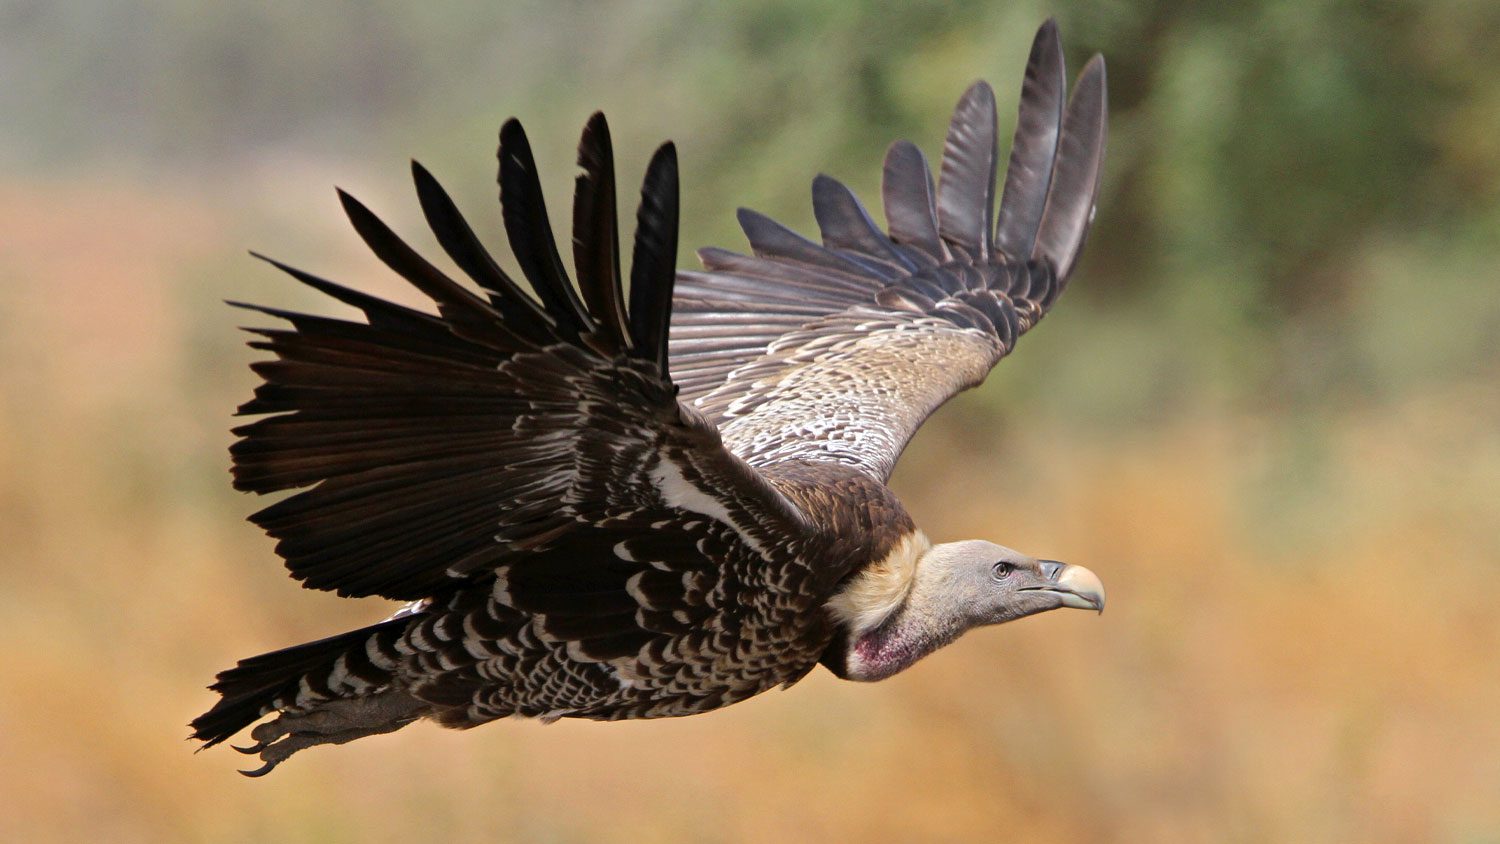 Vulture And Eagle Fight